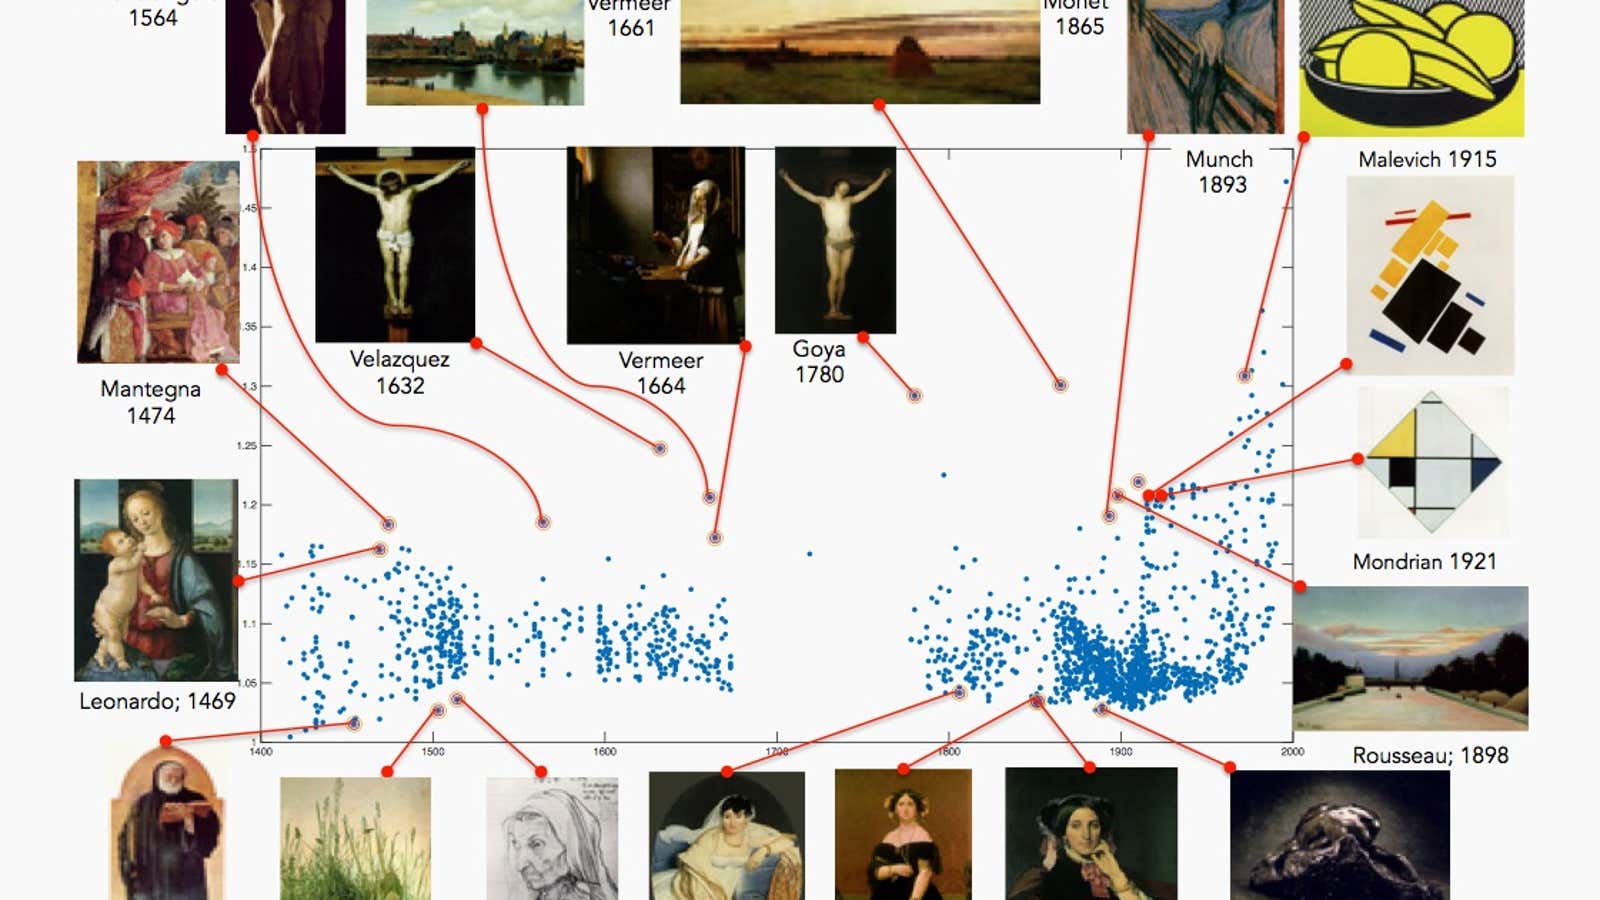 An analysis of 1,710 paintings. The horizontal axis corresponds to the year the painting was created, and the vertical axis corresponds to its creativity score according to the algorithm.